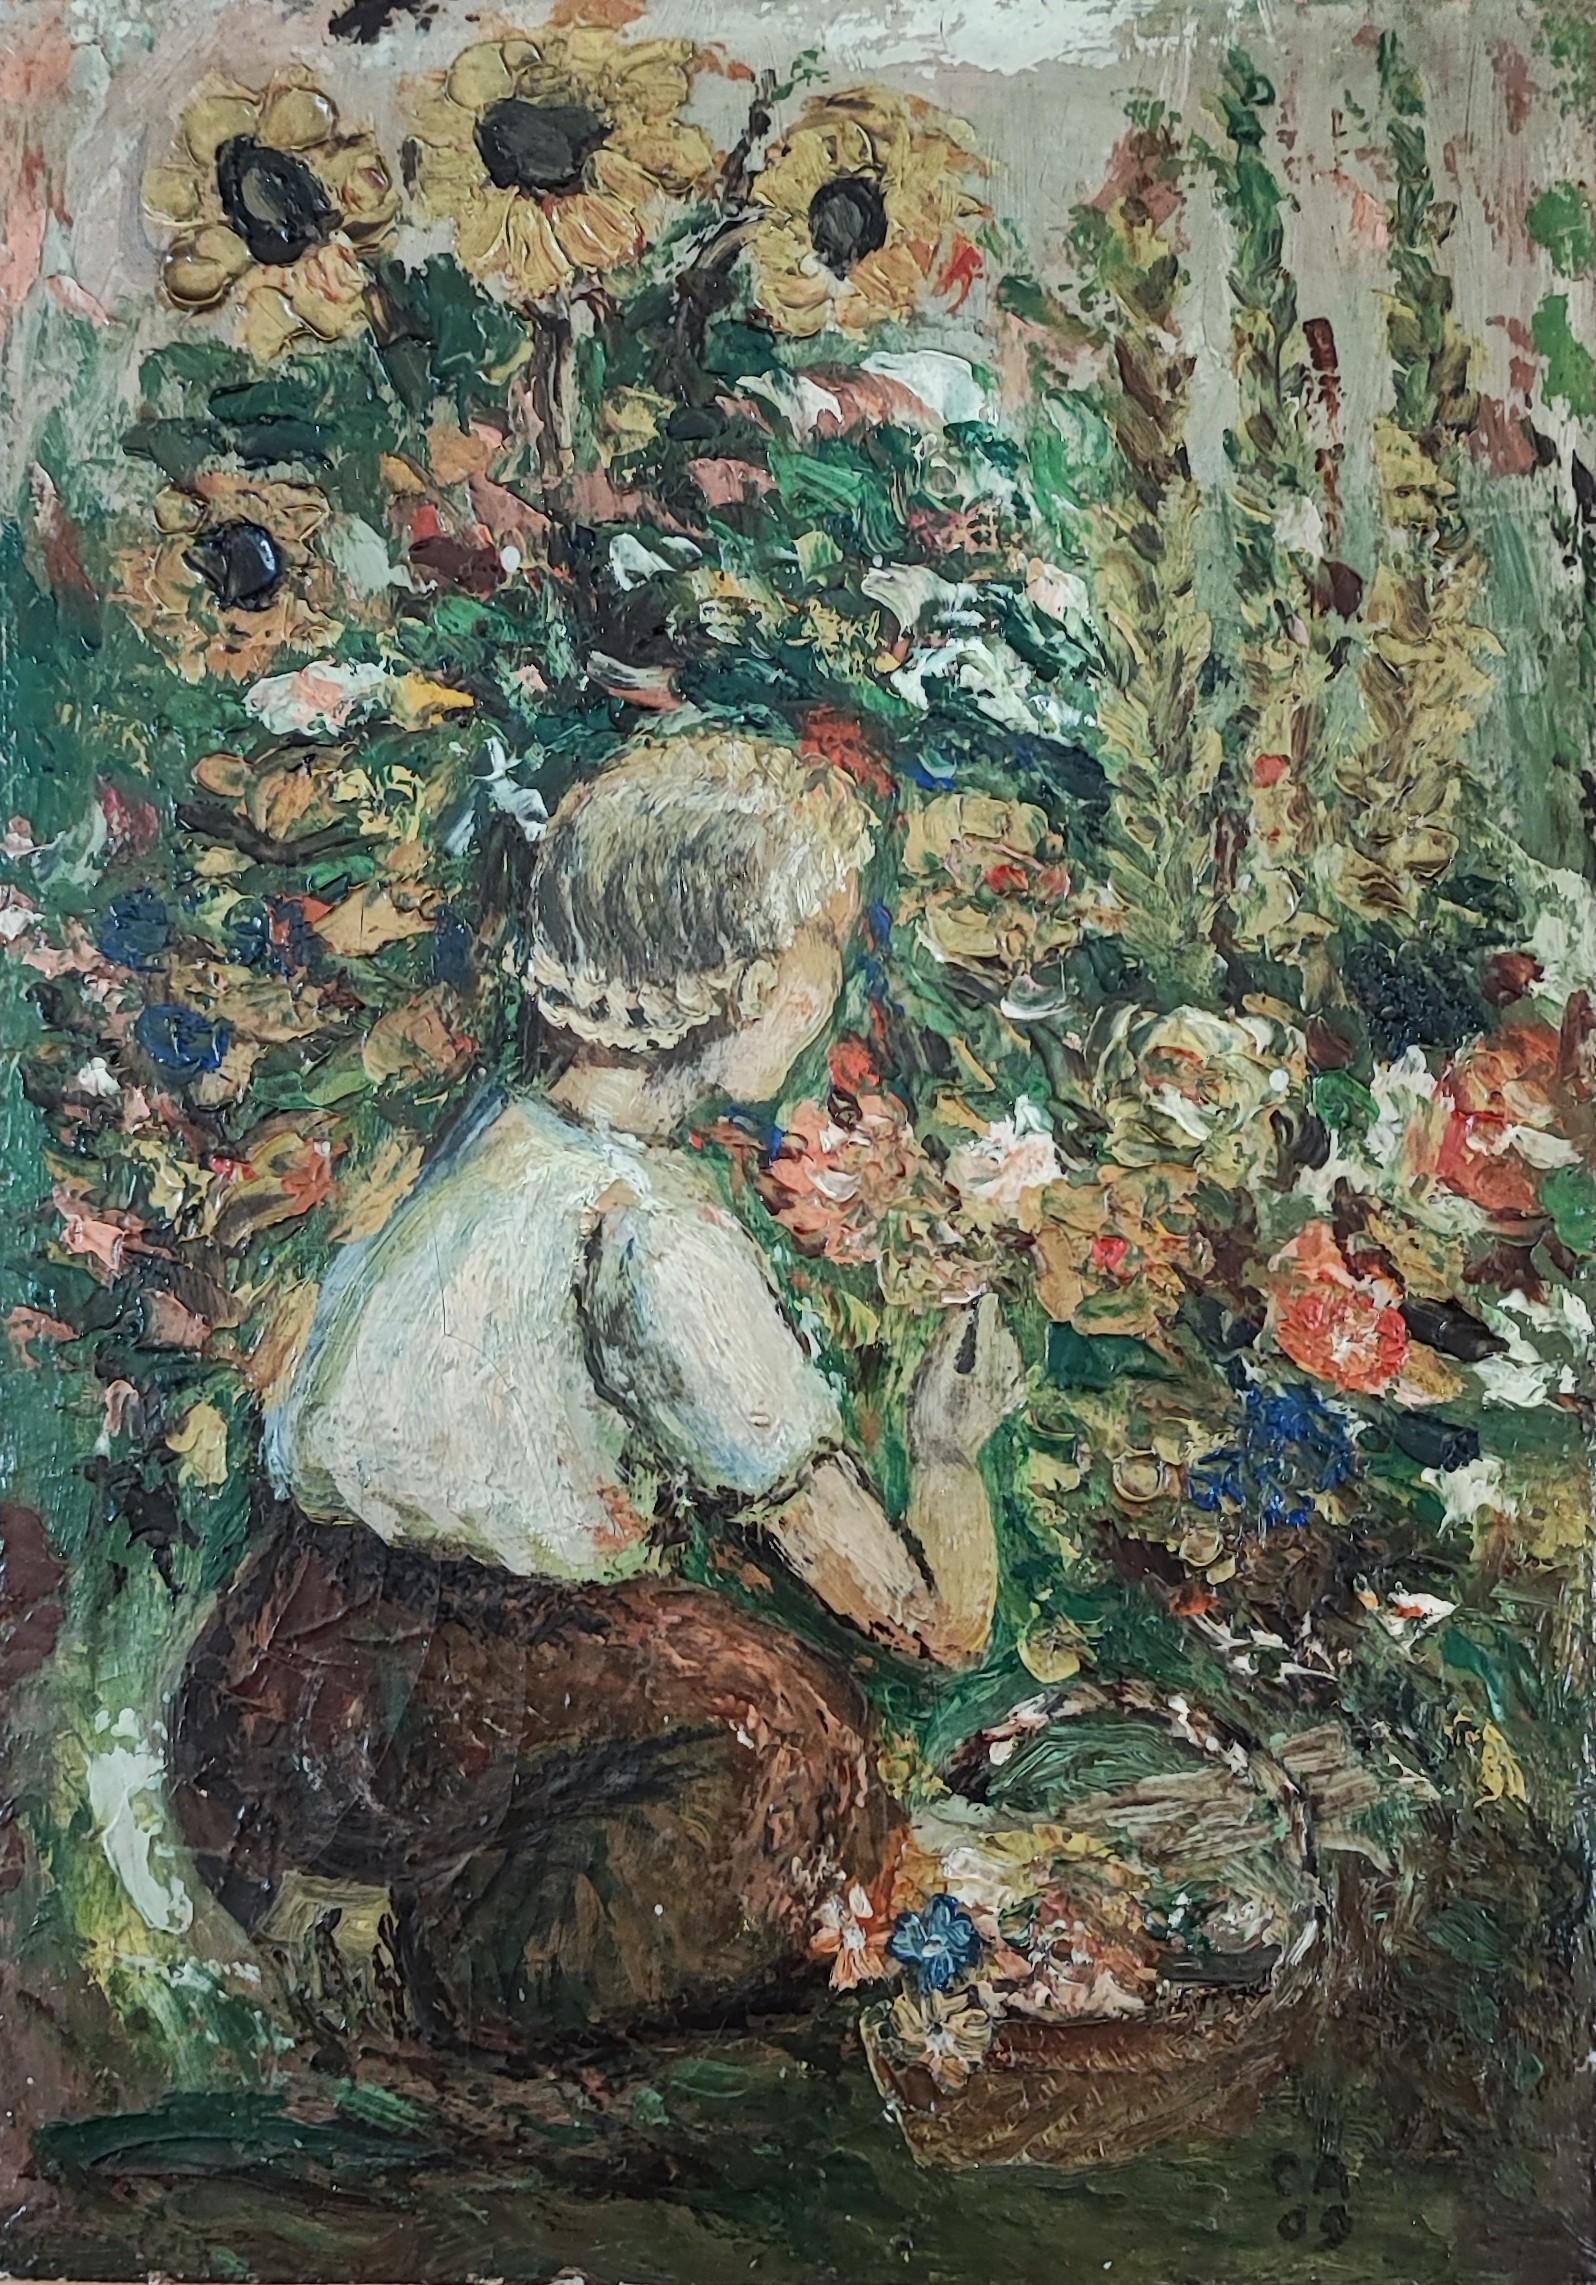 C.A. Figurative Painting - Young girl picking flowers